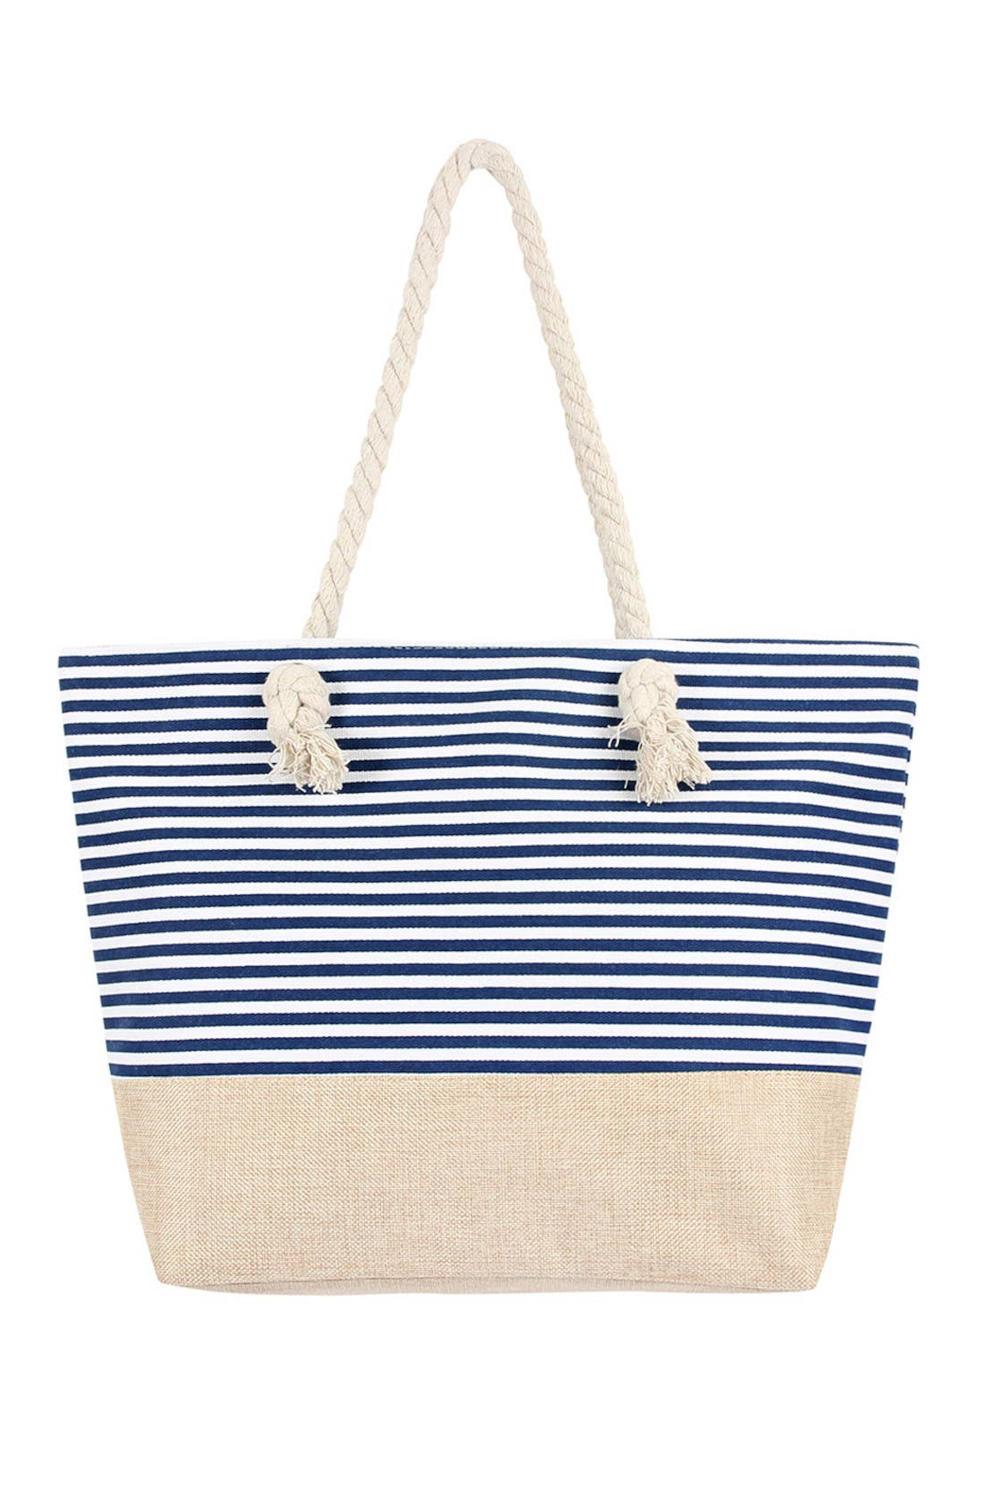 Blue Striped Tote Bag - Strawberry Moon Boutique